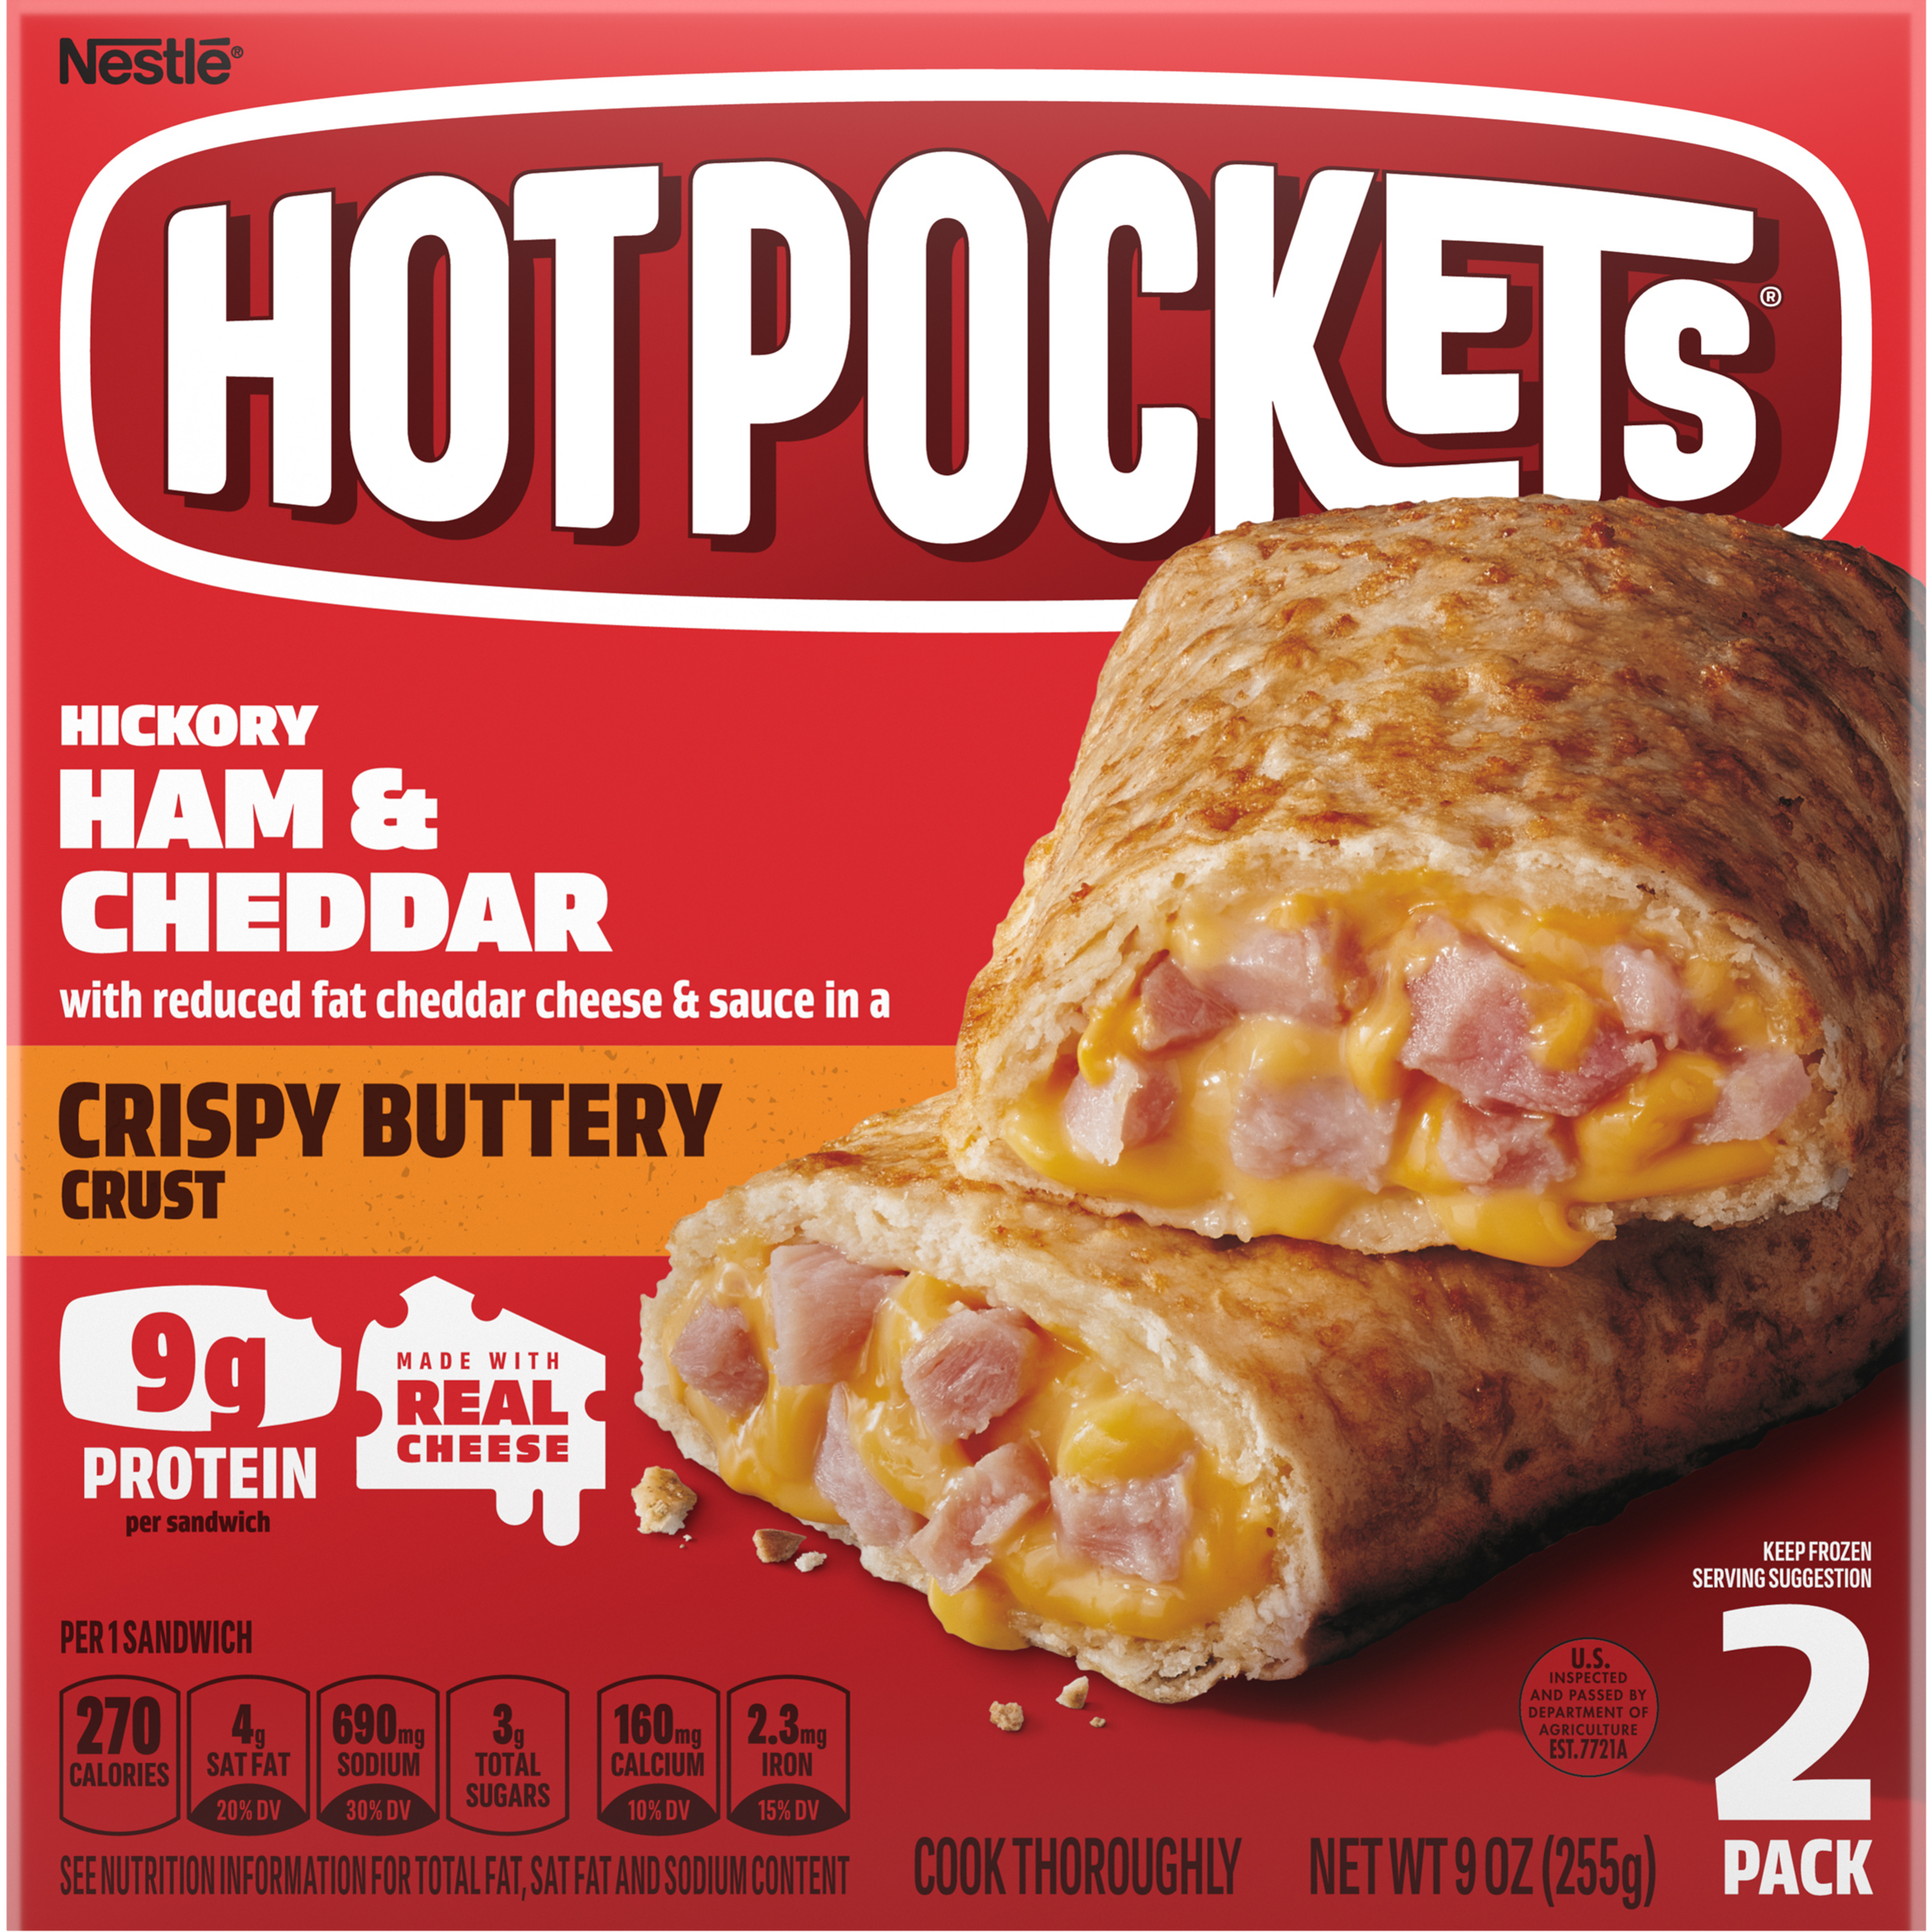 HOT POCKETS Crispy Buttery Crust Hickory Ham & Cheese (2 Pack) 8 units per case 9.0 oz